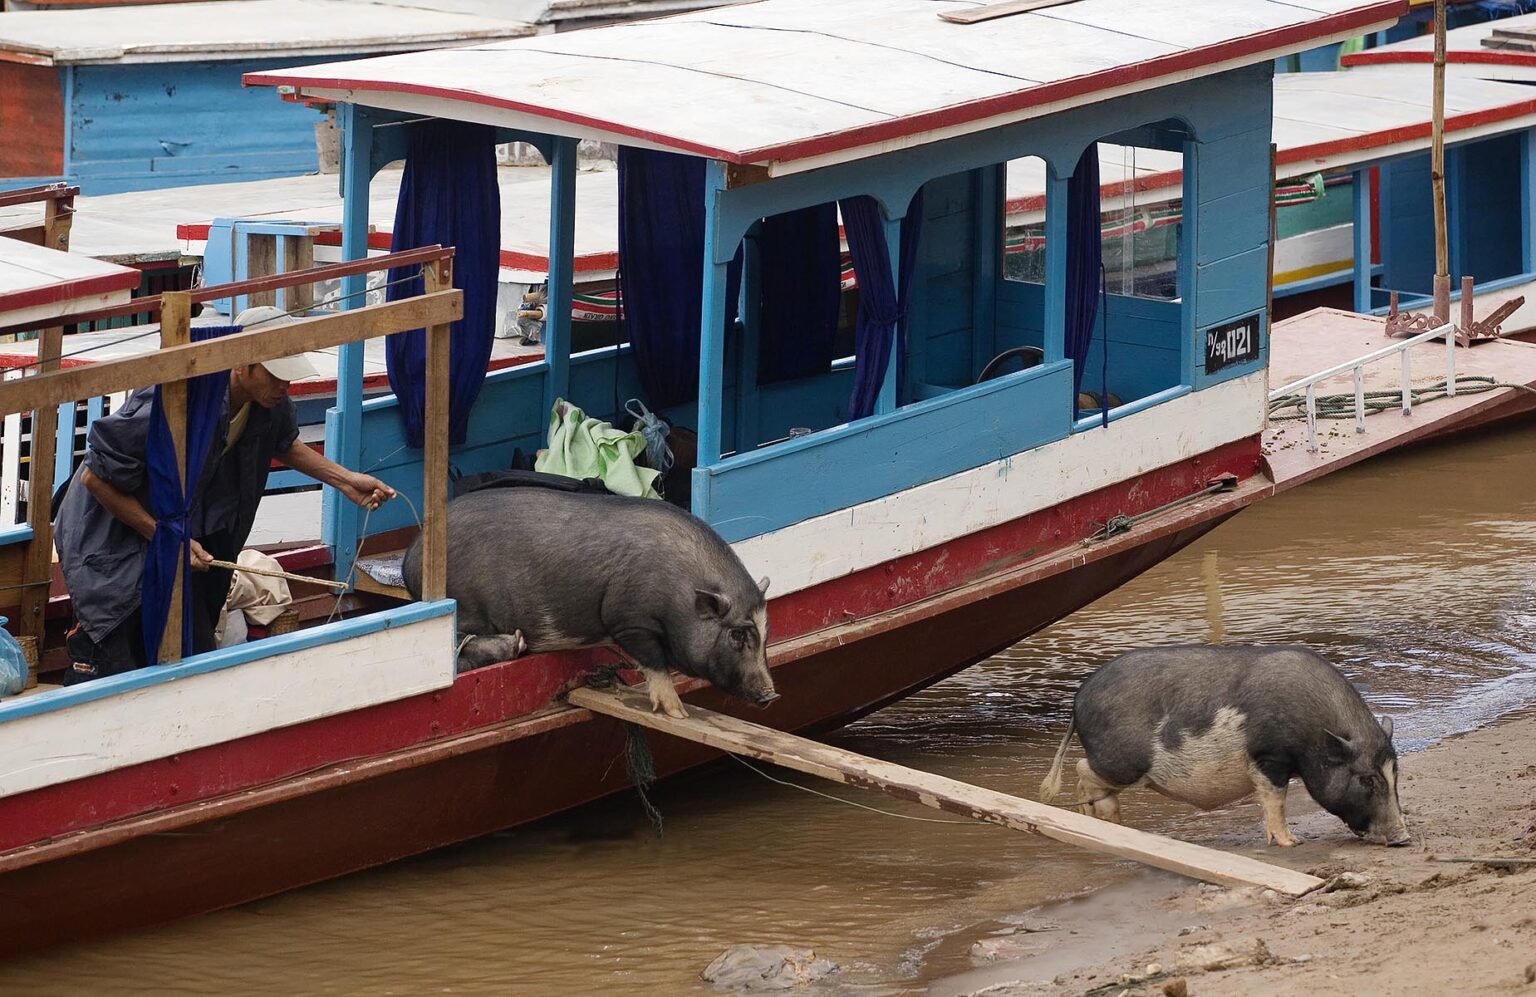 Pigs are unloaded from a river boat which plies the waters of the Mekong River - LUANG PROBANG, LAOS